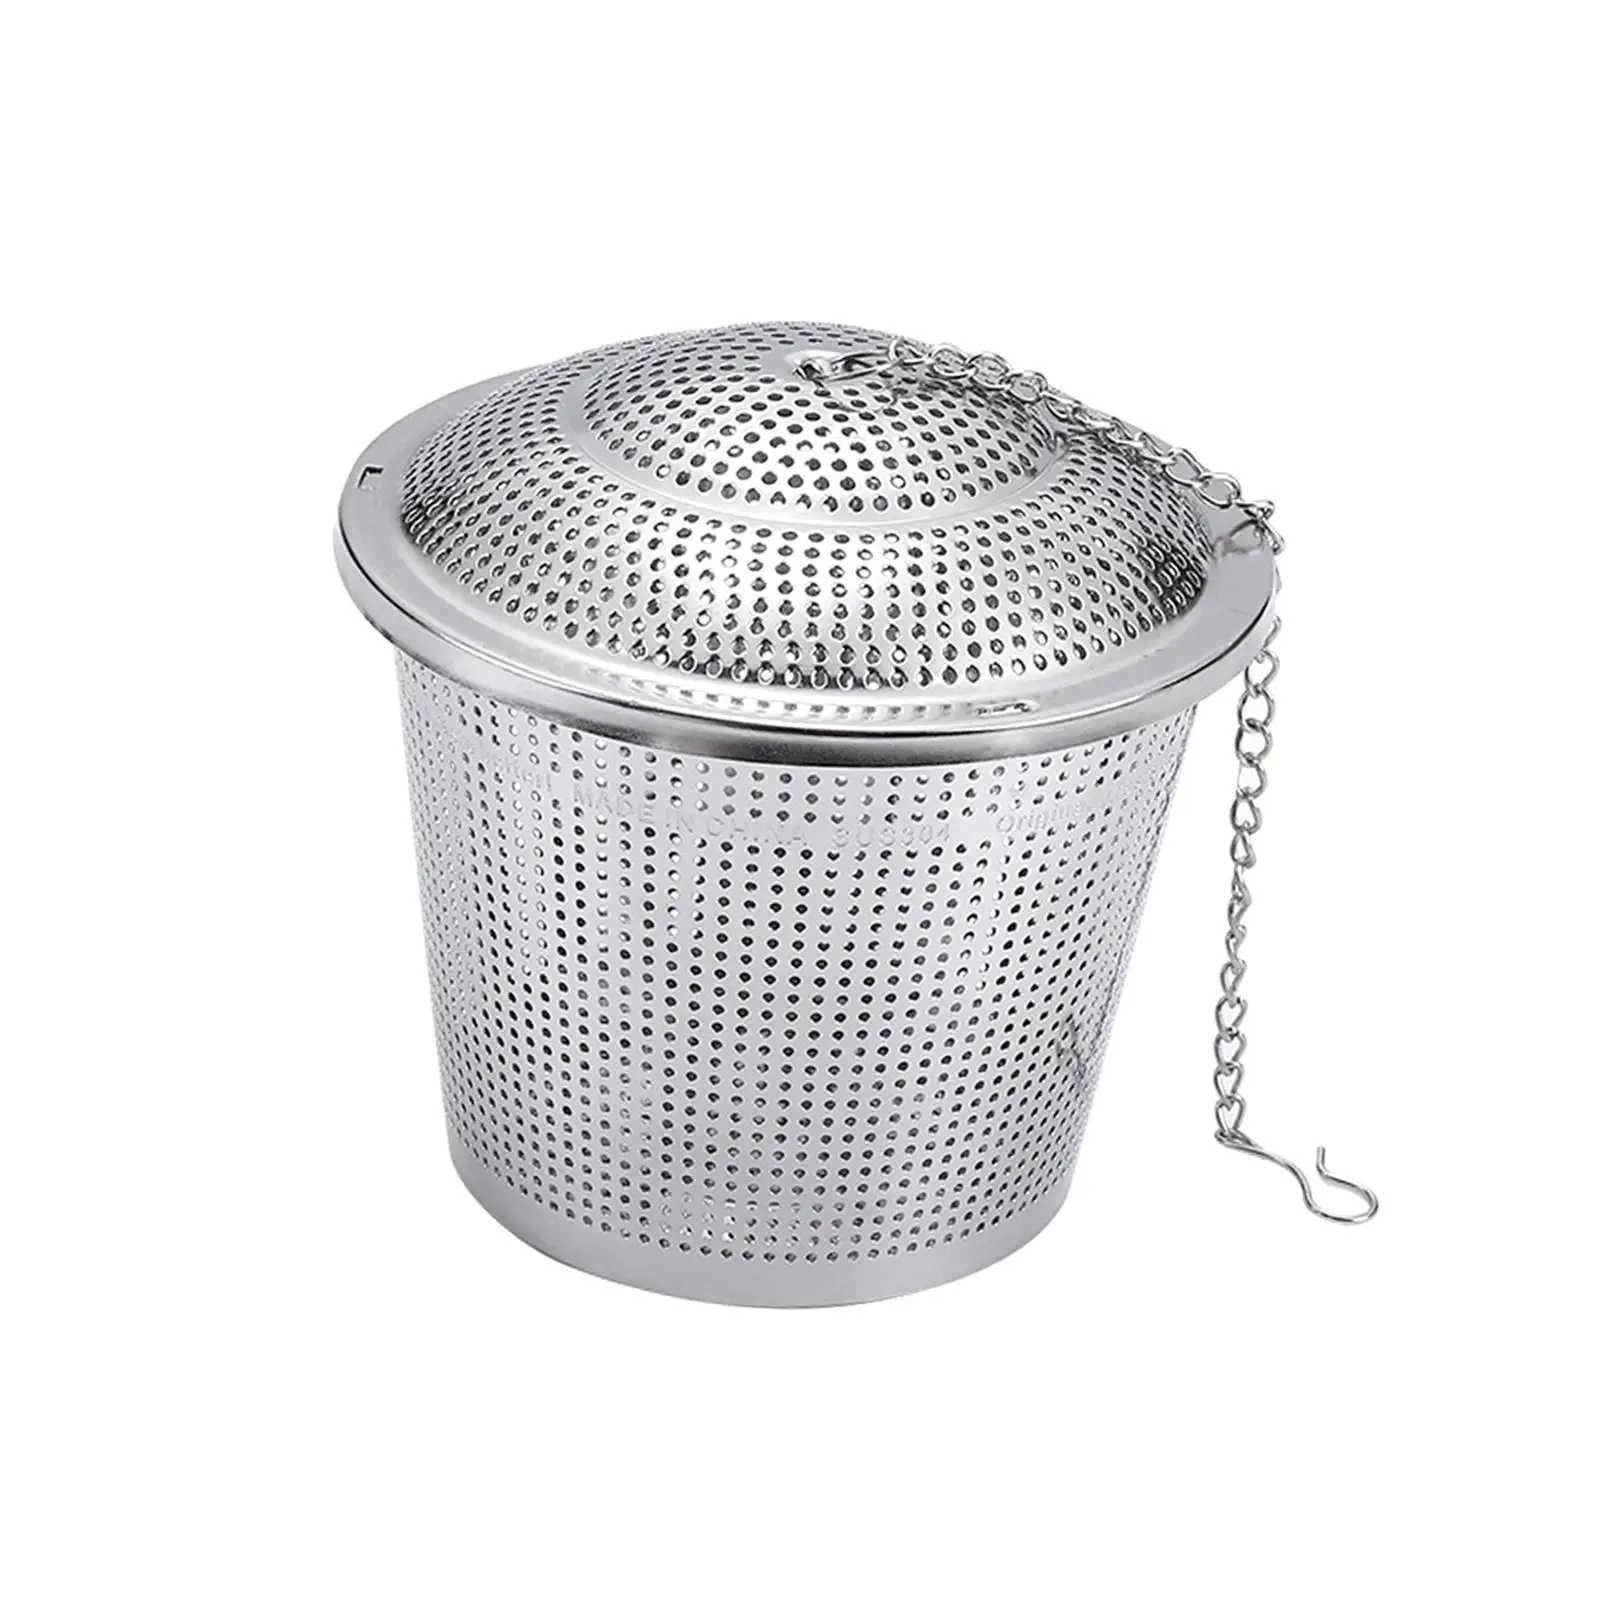 Tea Ball Infuser for Loose Leaf Stainless Steel with Extended Chain Hook Chained Lid Fine Mesh Spice Infuser for Stews Soup